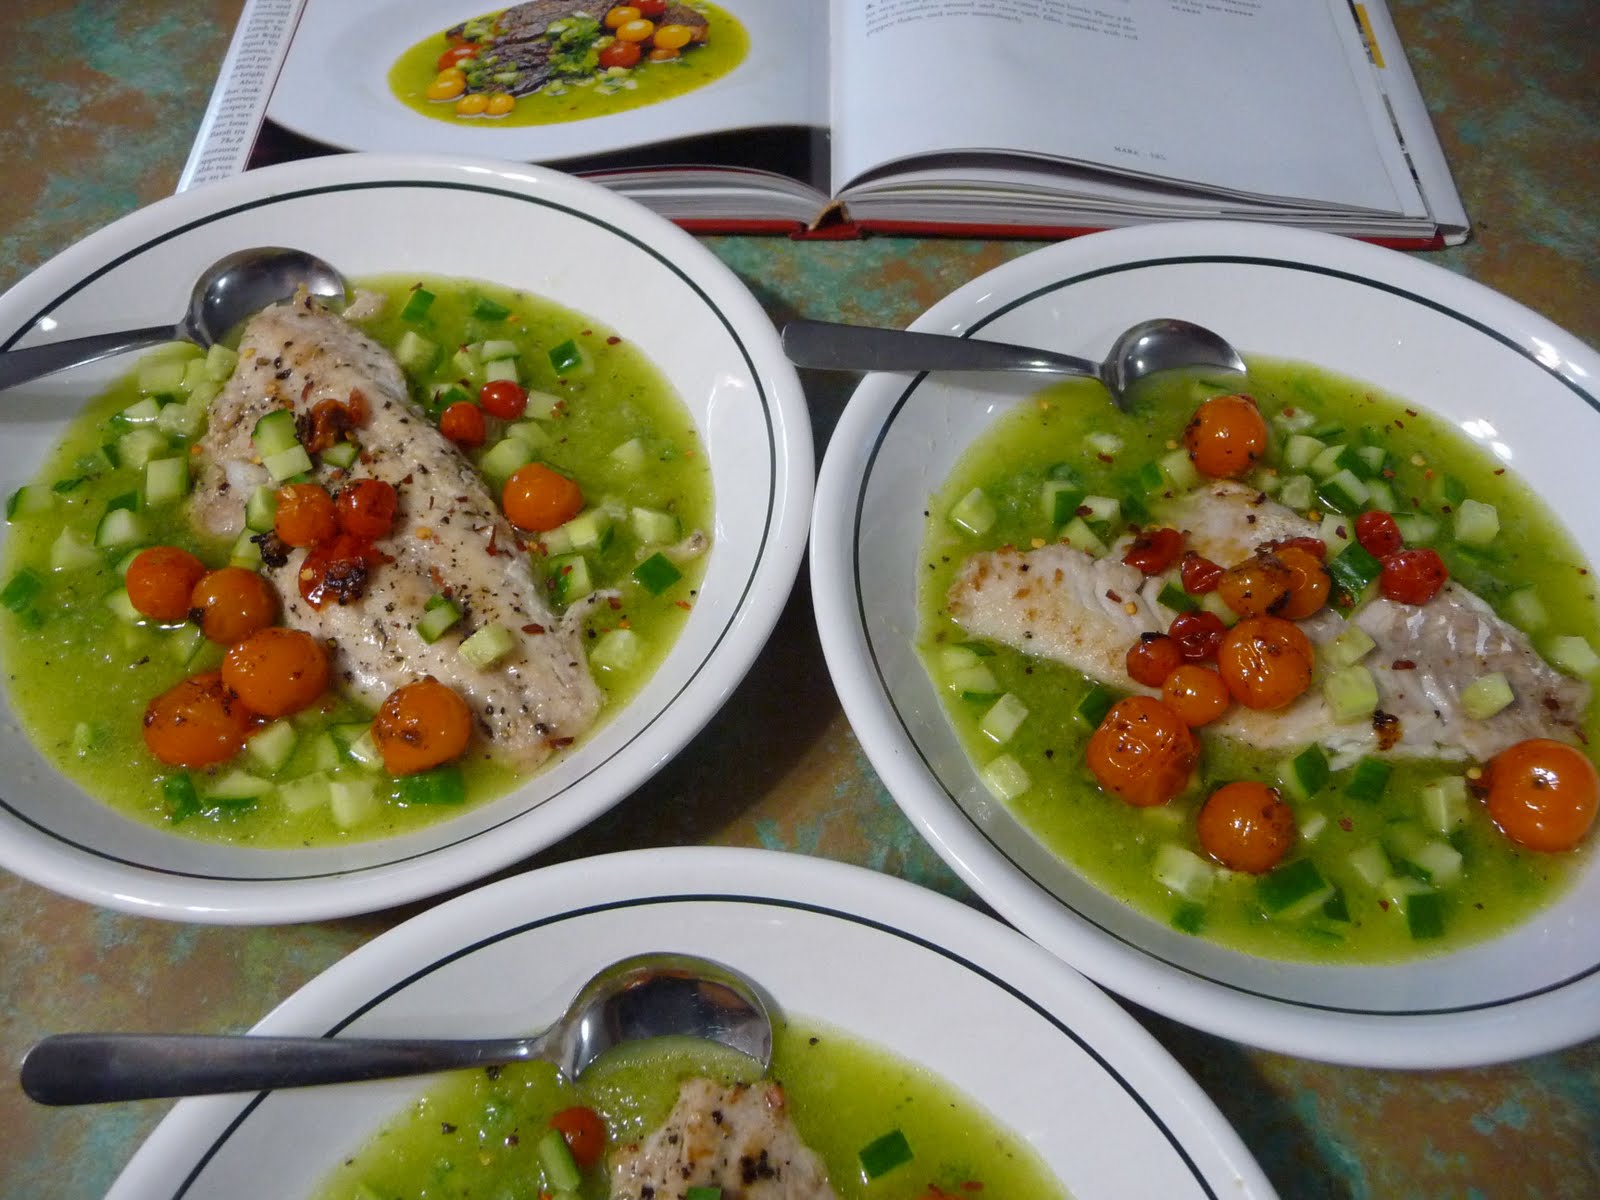 gastroblog: tilefish with tomato and cucumber gazpacho